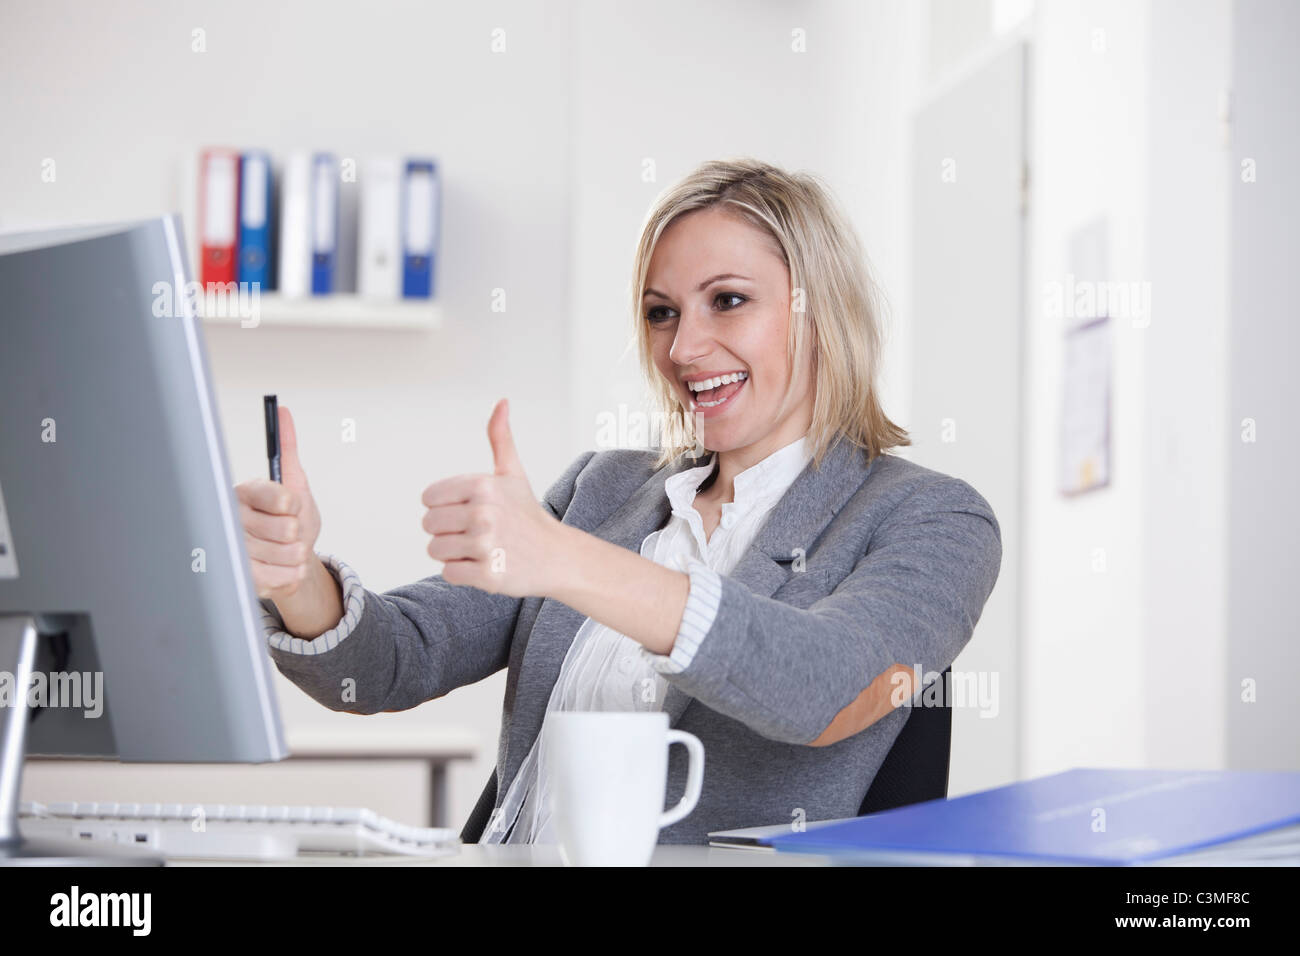 Germany, Bavaria, Munich, Businesswoman showing Thumbs up, smiling Banque D'Images